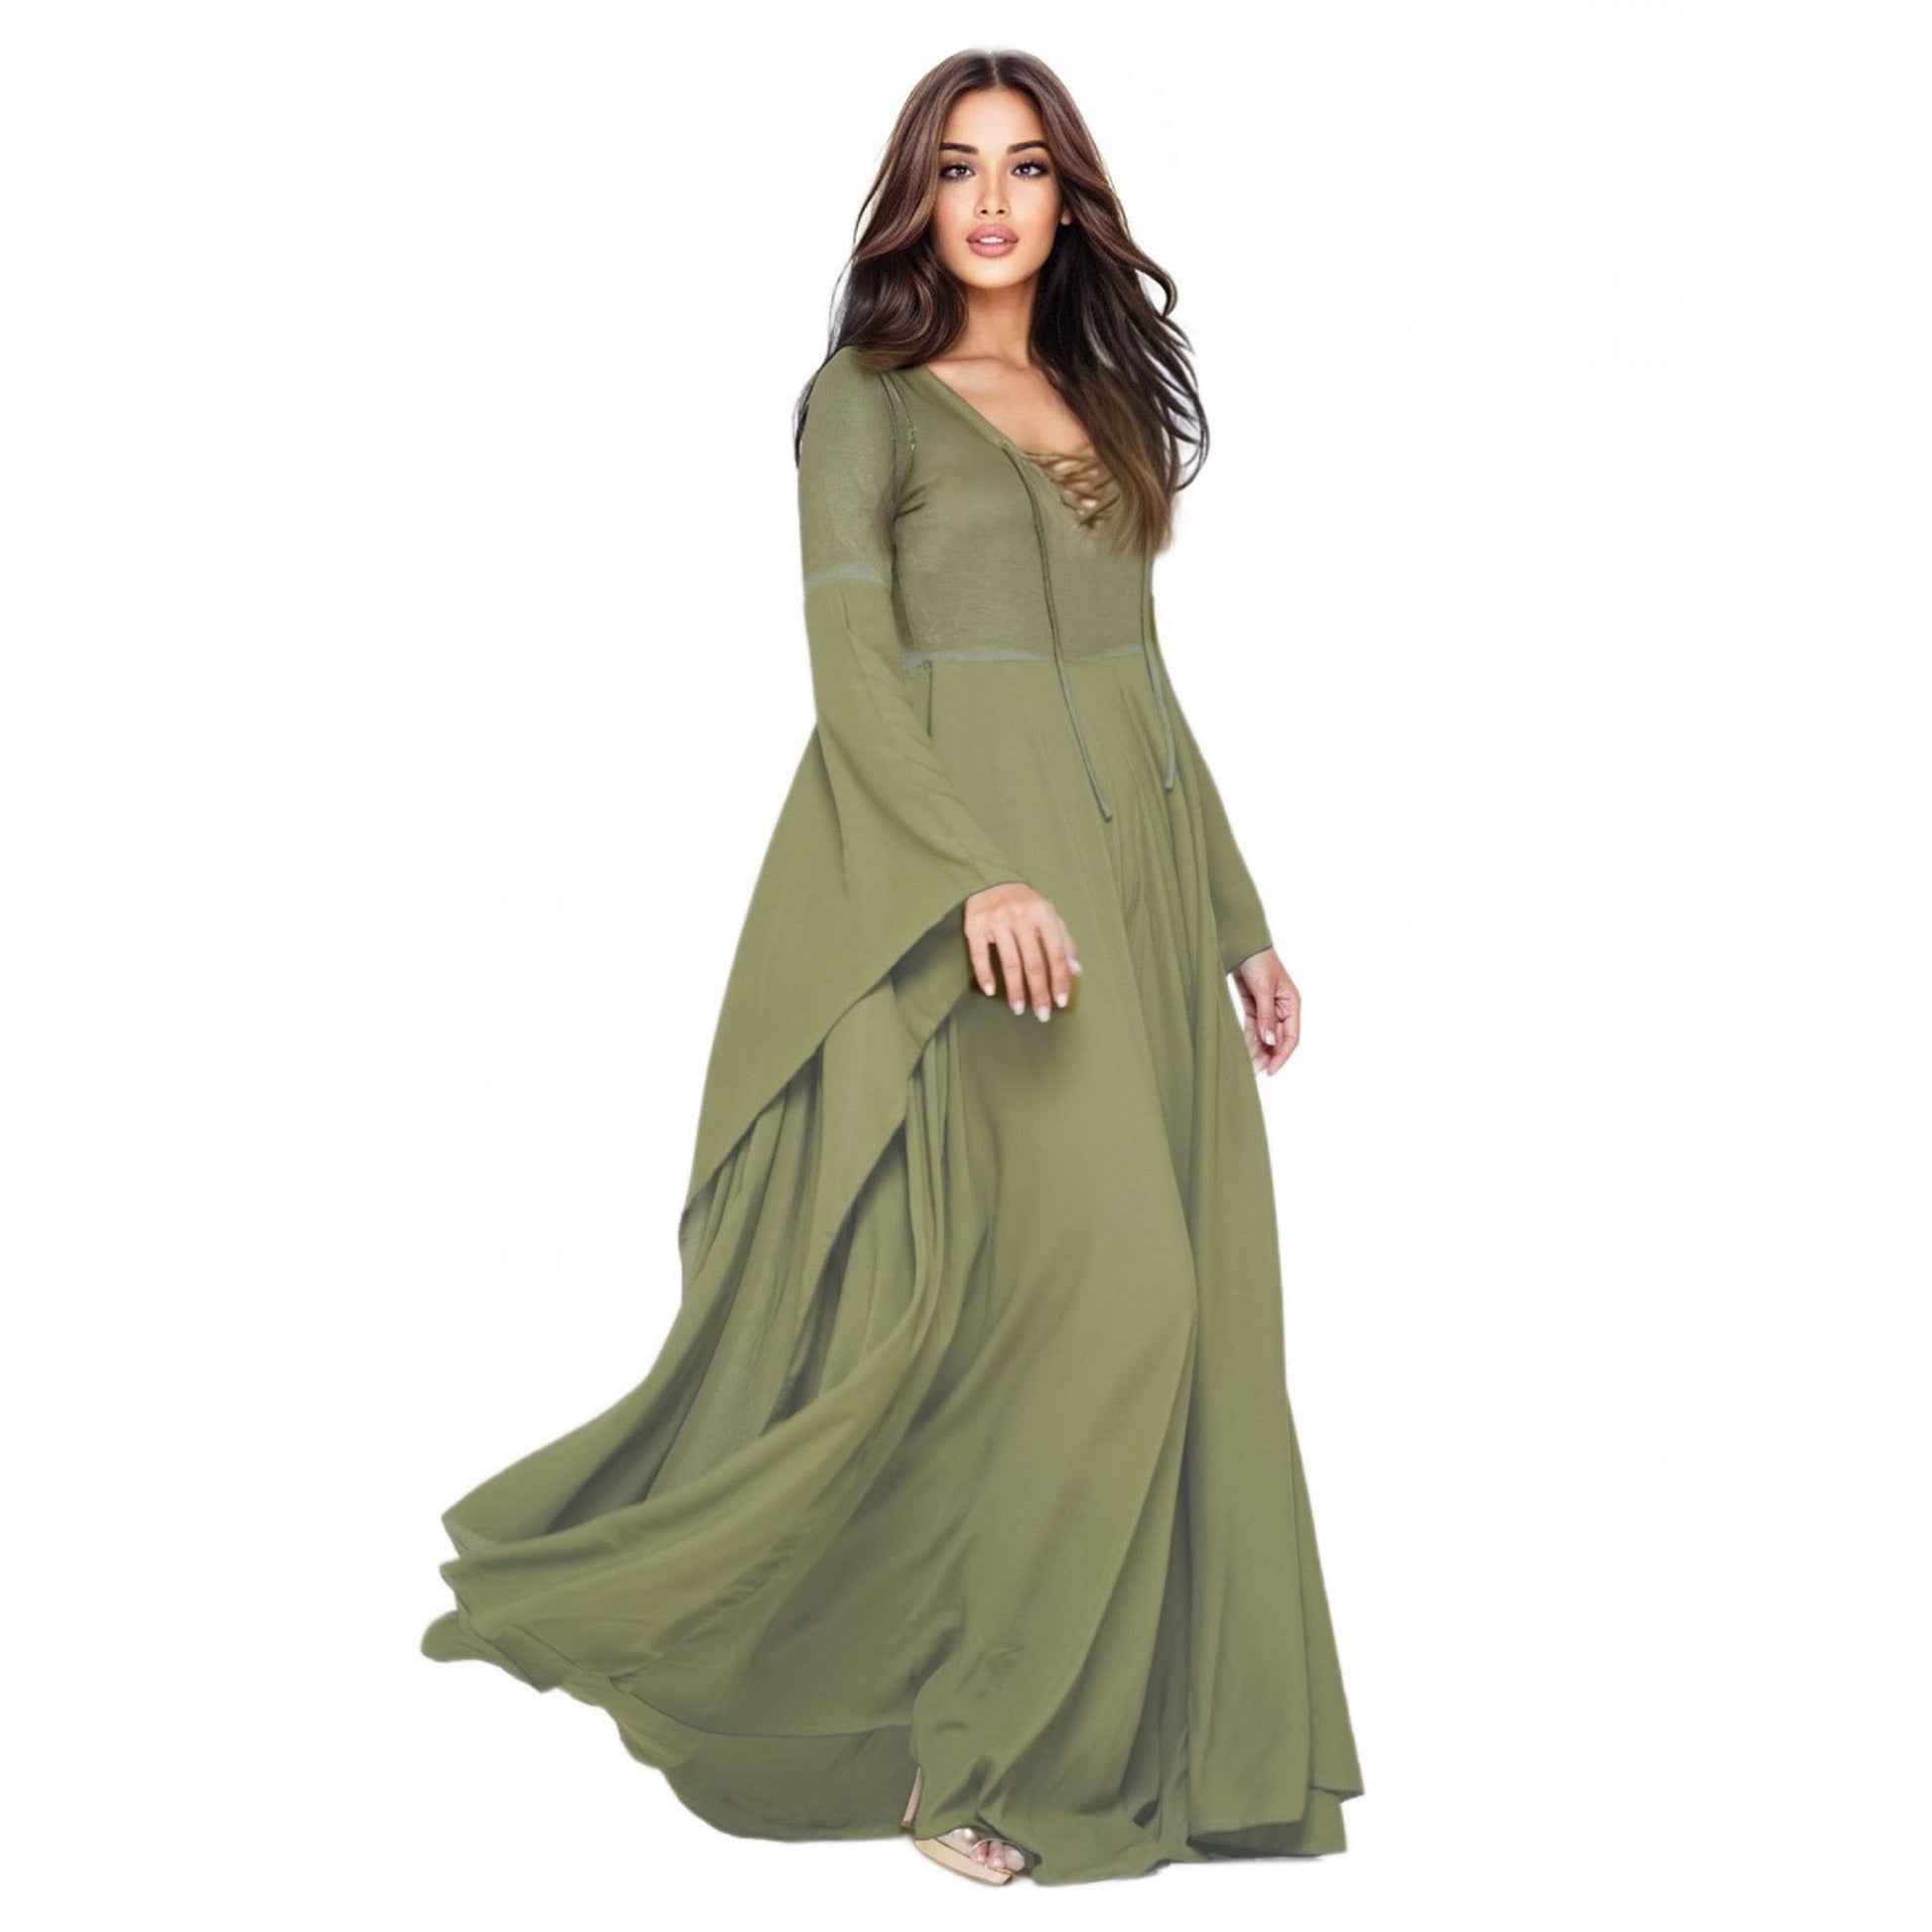 Emely Flowing Sleeve Lace Up Ties Renaissance Maxi Dress - The Bohemian Closet